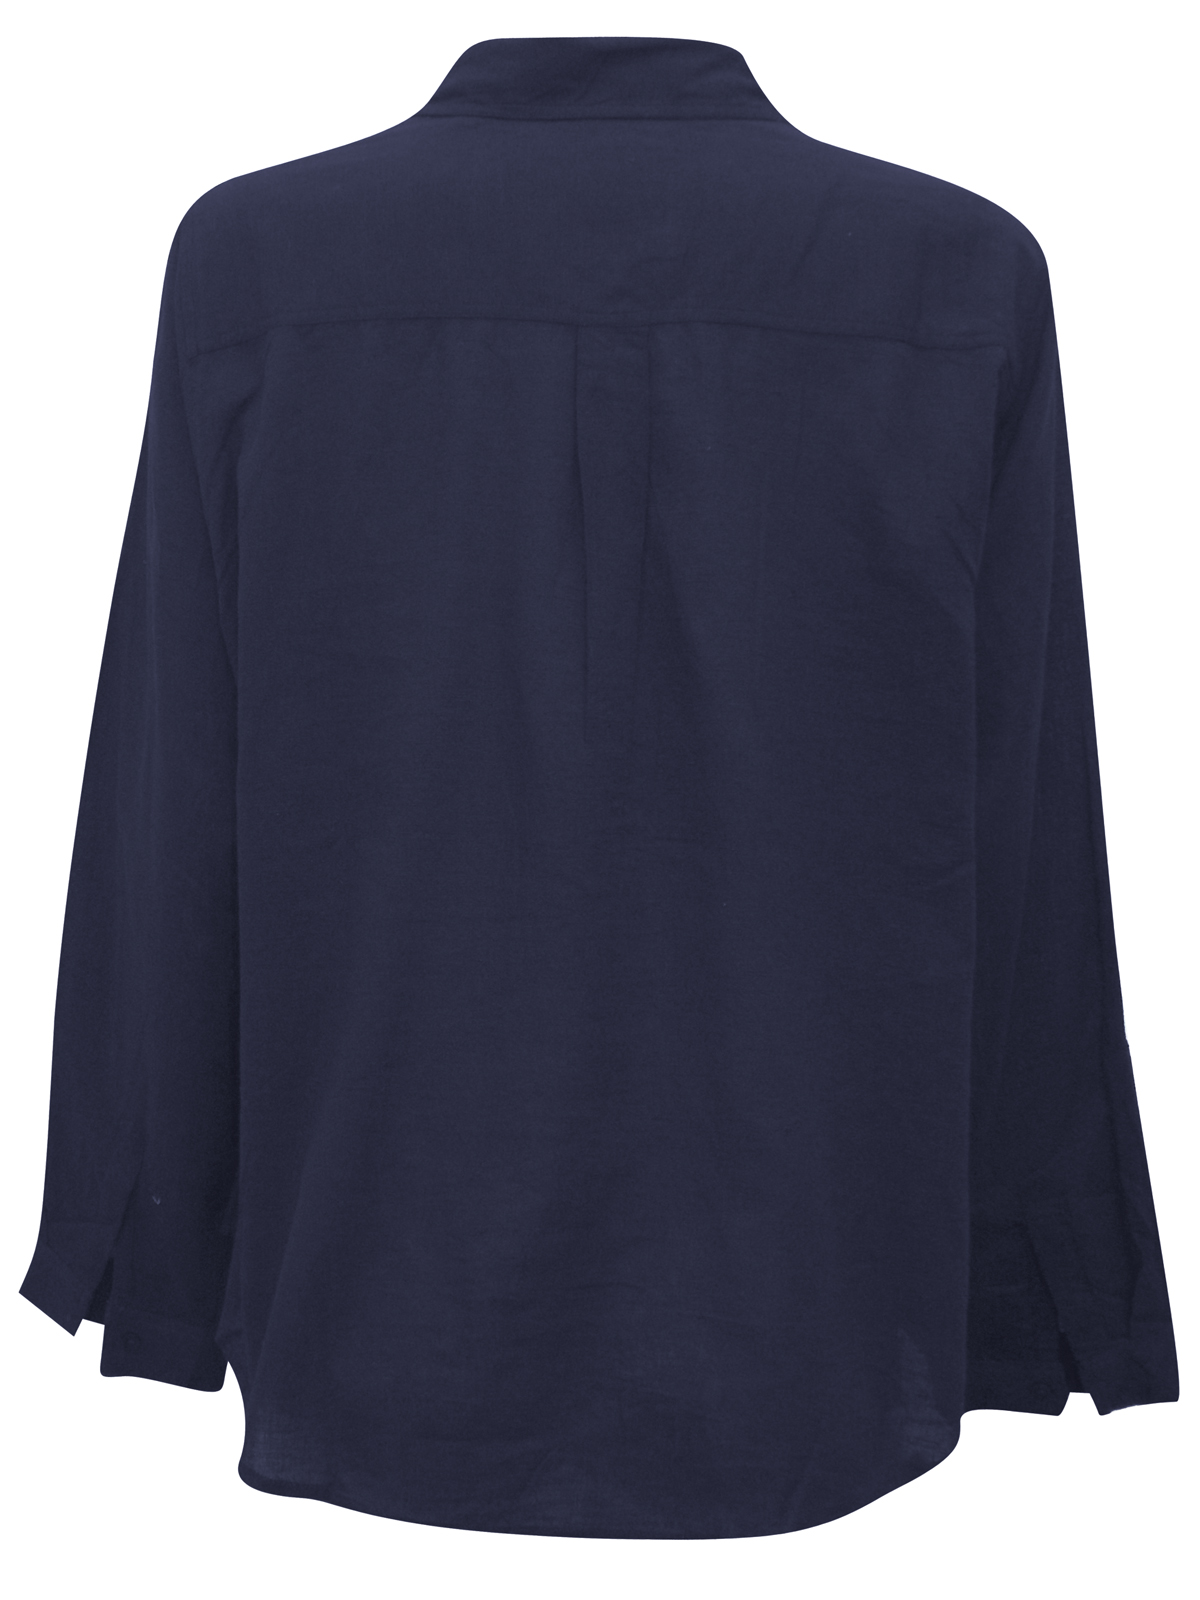 Marks and Spencer - - M&5 NAVY Pure Linen Long Sleeve Shirt - Size 8 to 18